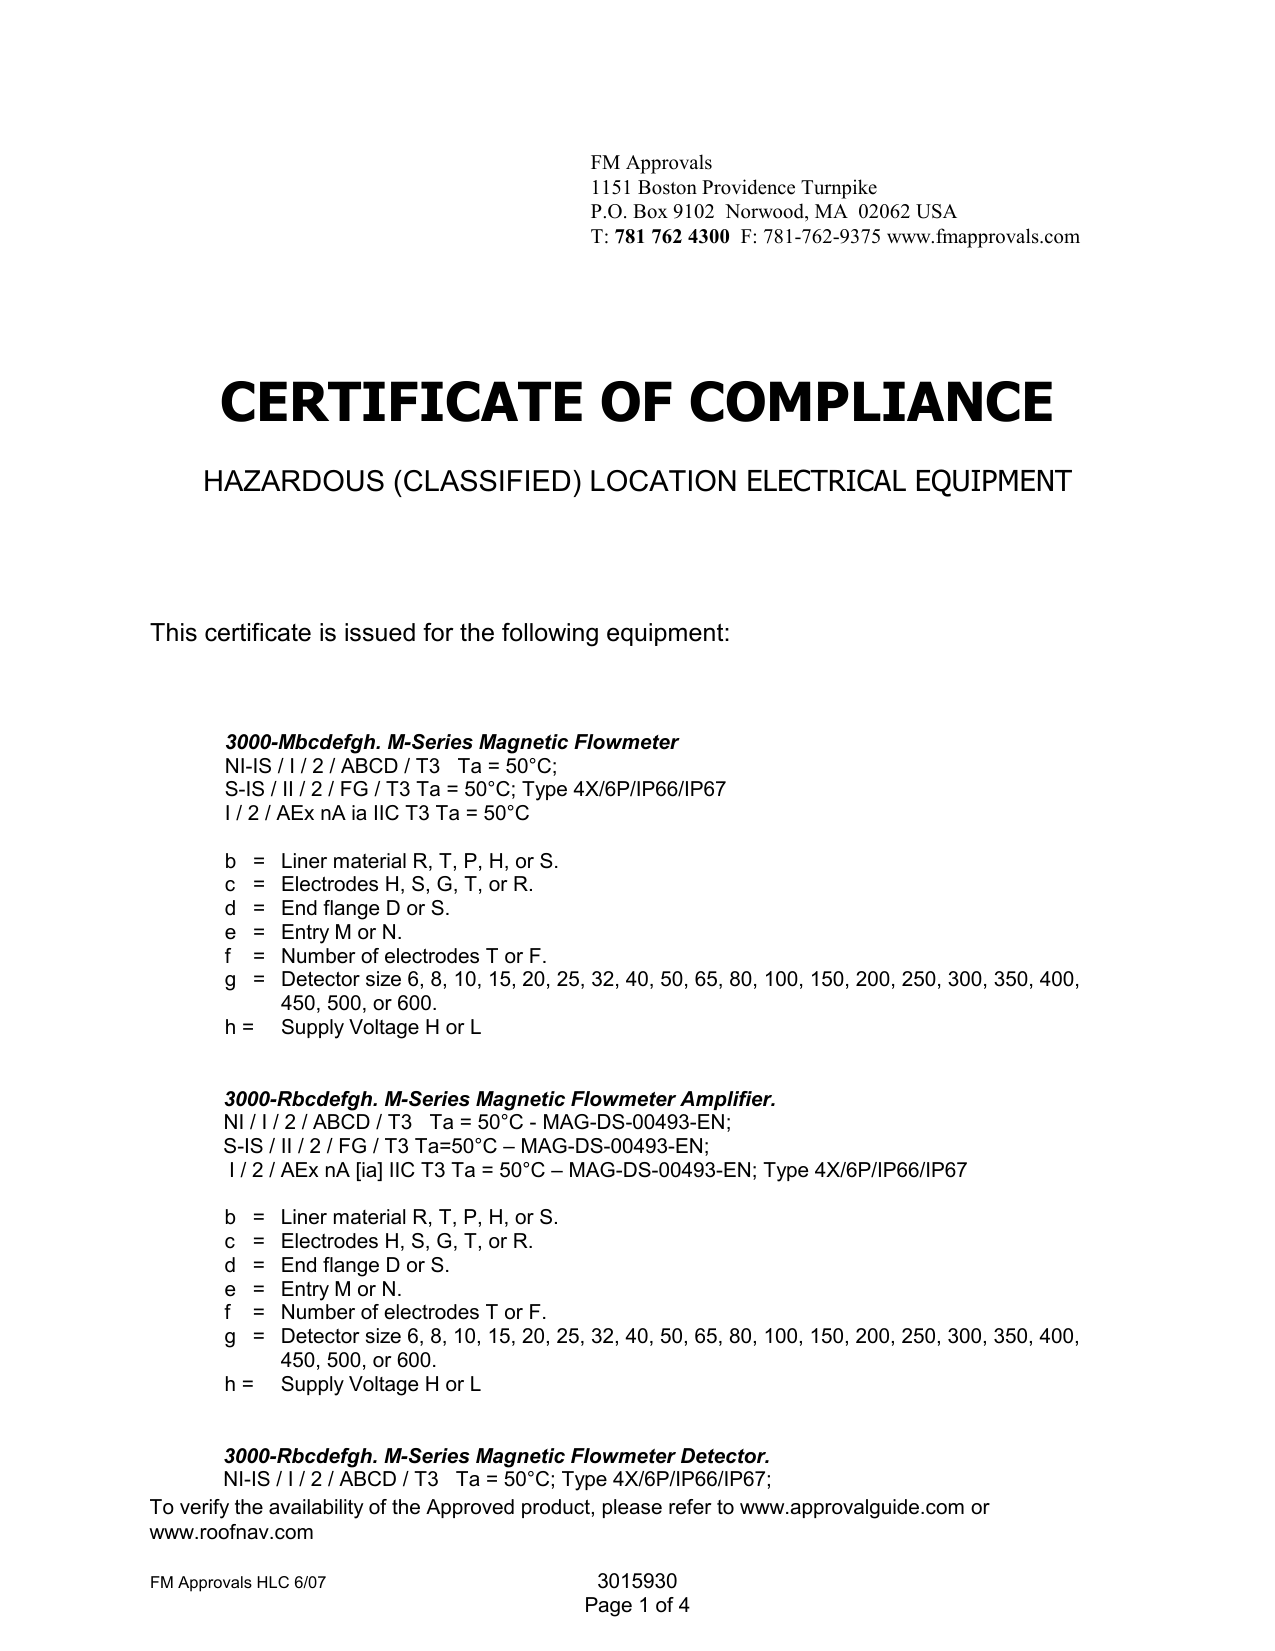 Certificate Of Compliance Formerly Known As An Equipment Use Permit ...